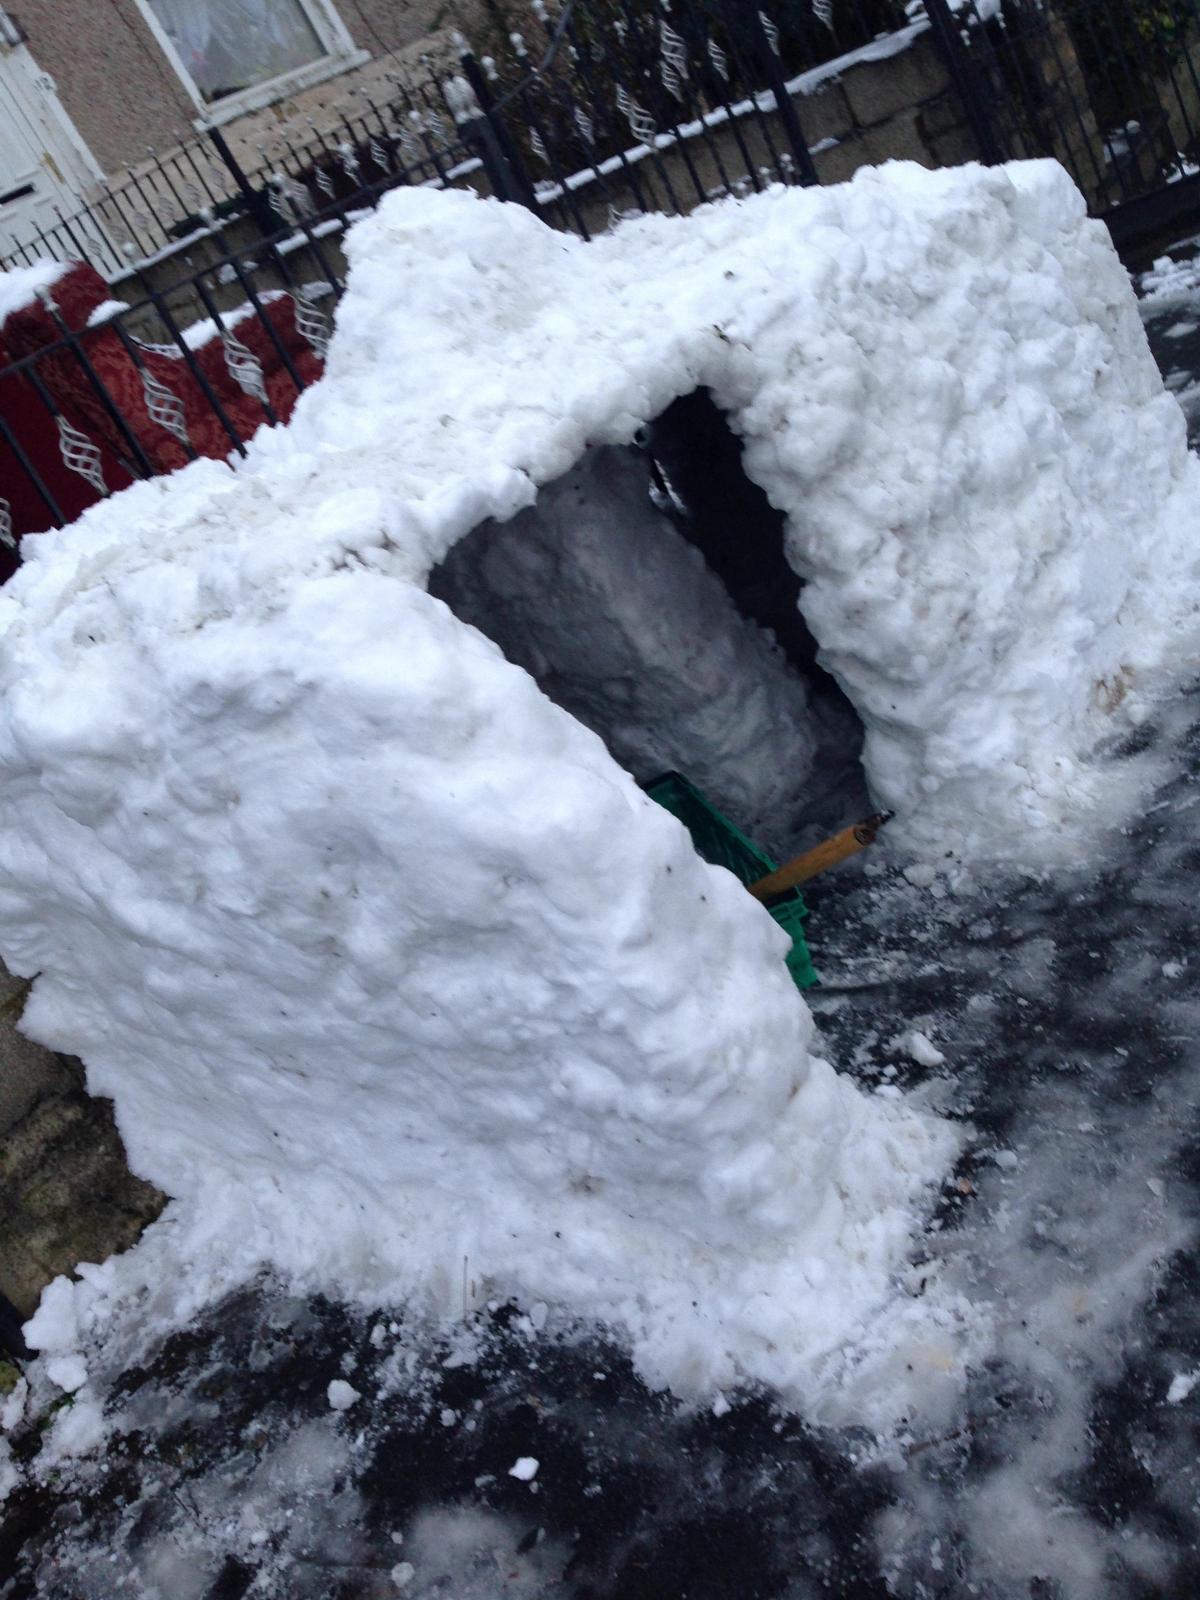 Memuna Bismilla sent us this picture of a mosque inspired igloo with two bedrooms in it!